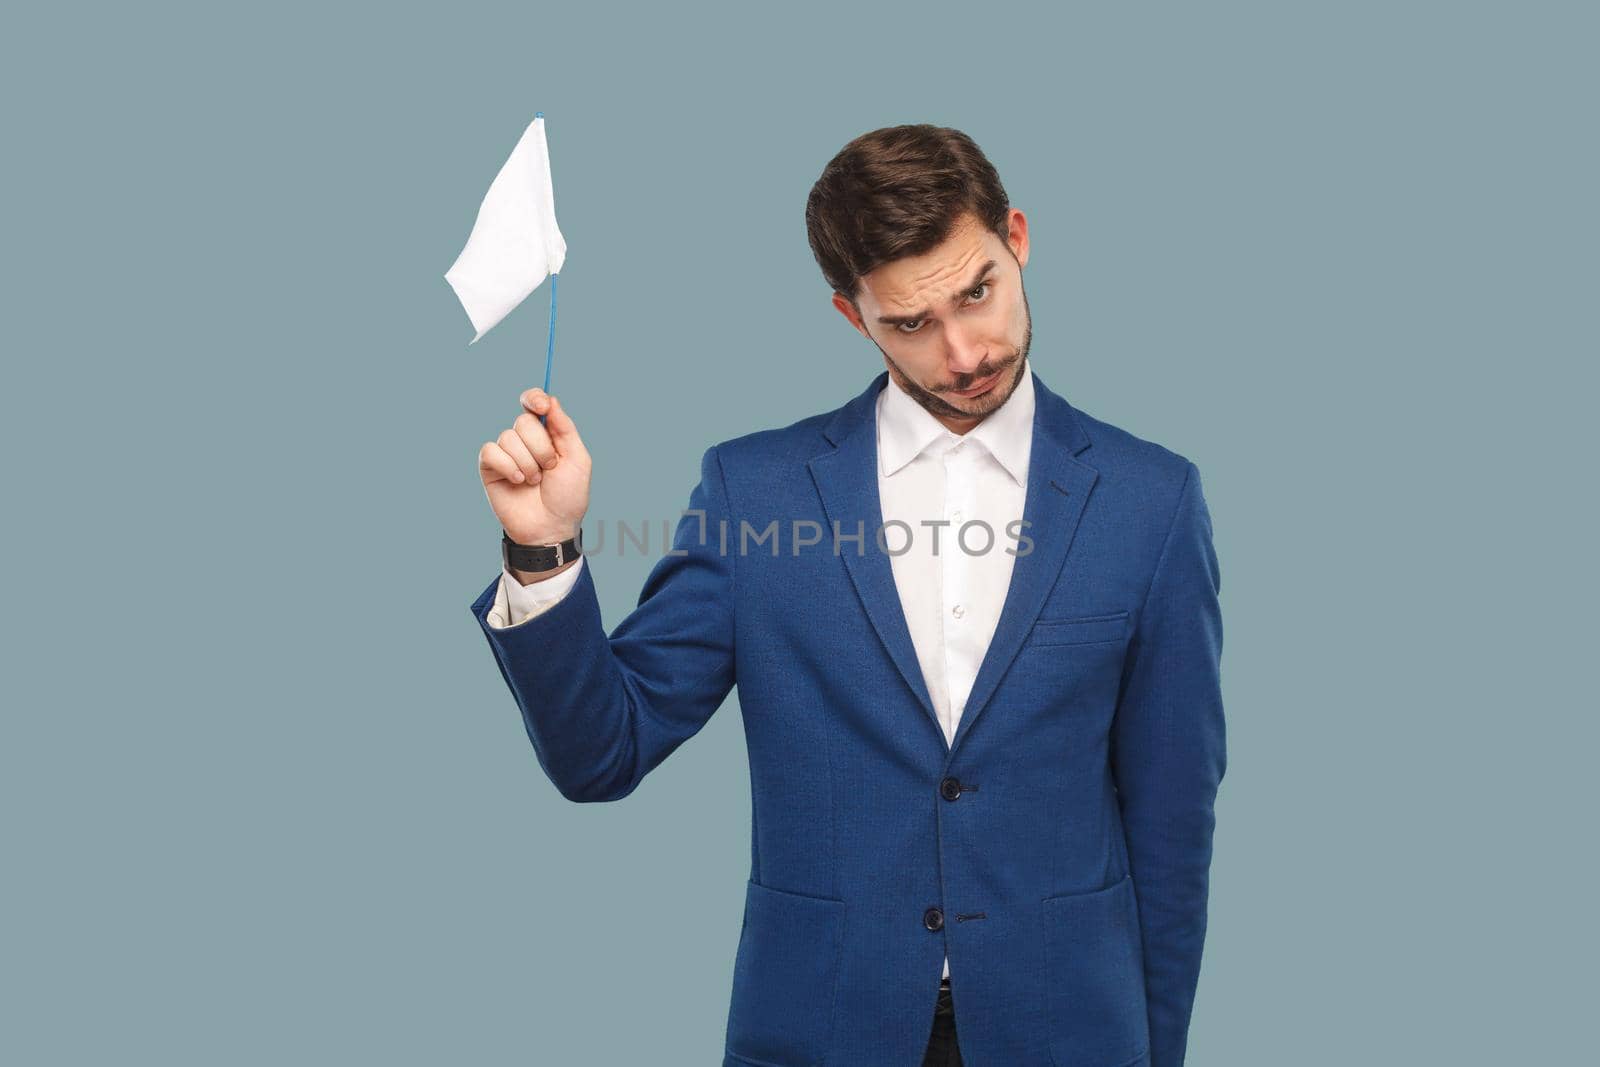 I am give up. sad failure businessman in blue jacket and white shirt standing and holding white flag and looking at camera with sad face. Indoor, studio shot isolated on light blue background.